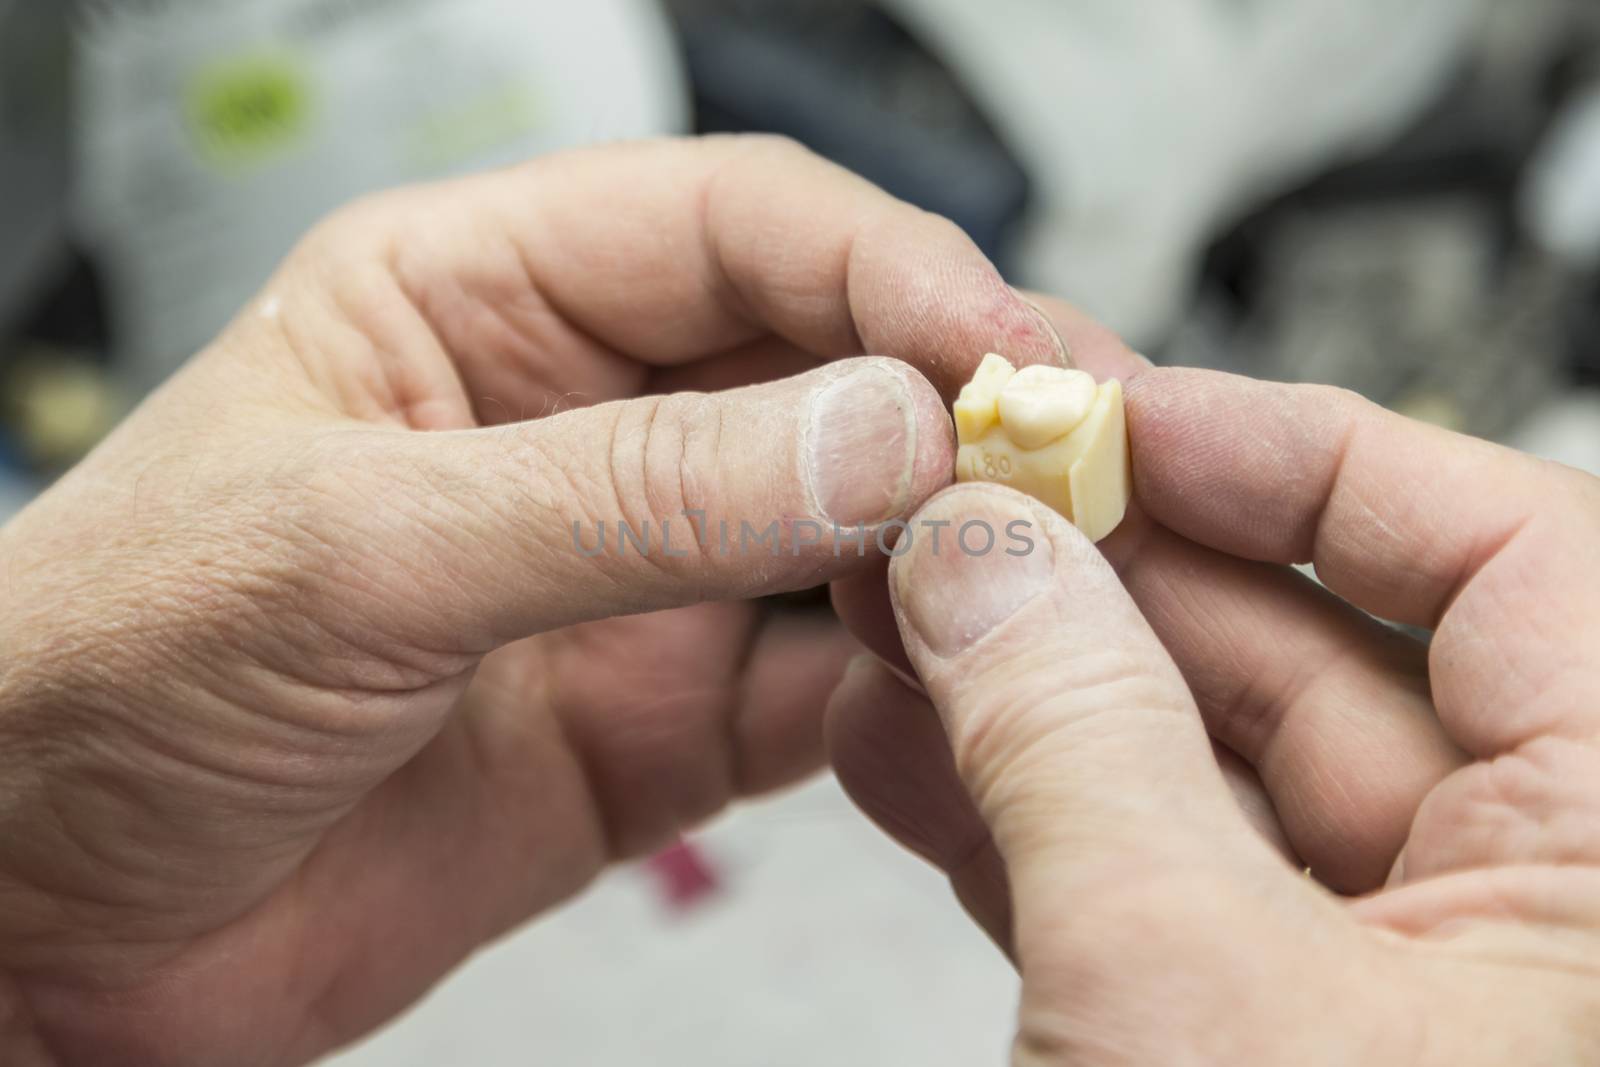 Dental Technician Working On 3D Printed Mold For Tooth Implants by Feverpitched